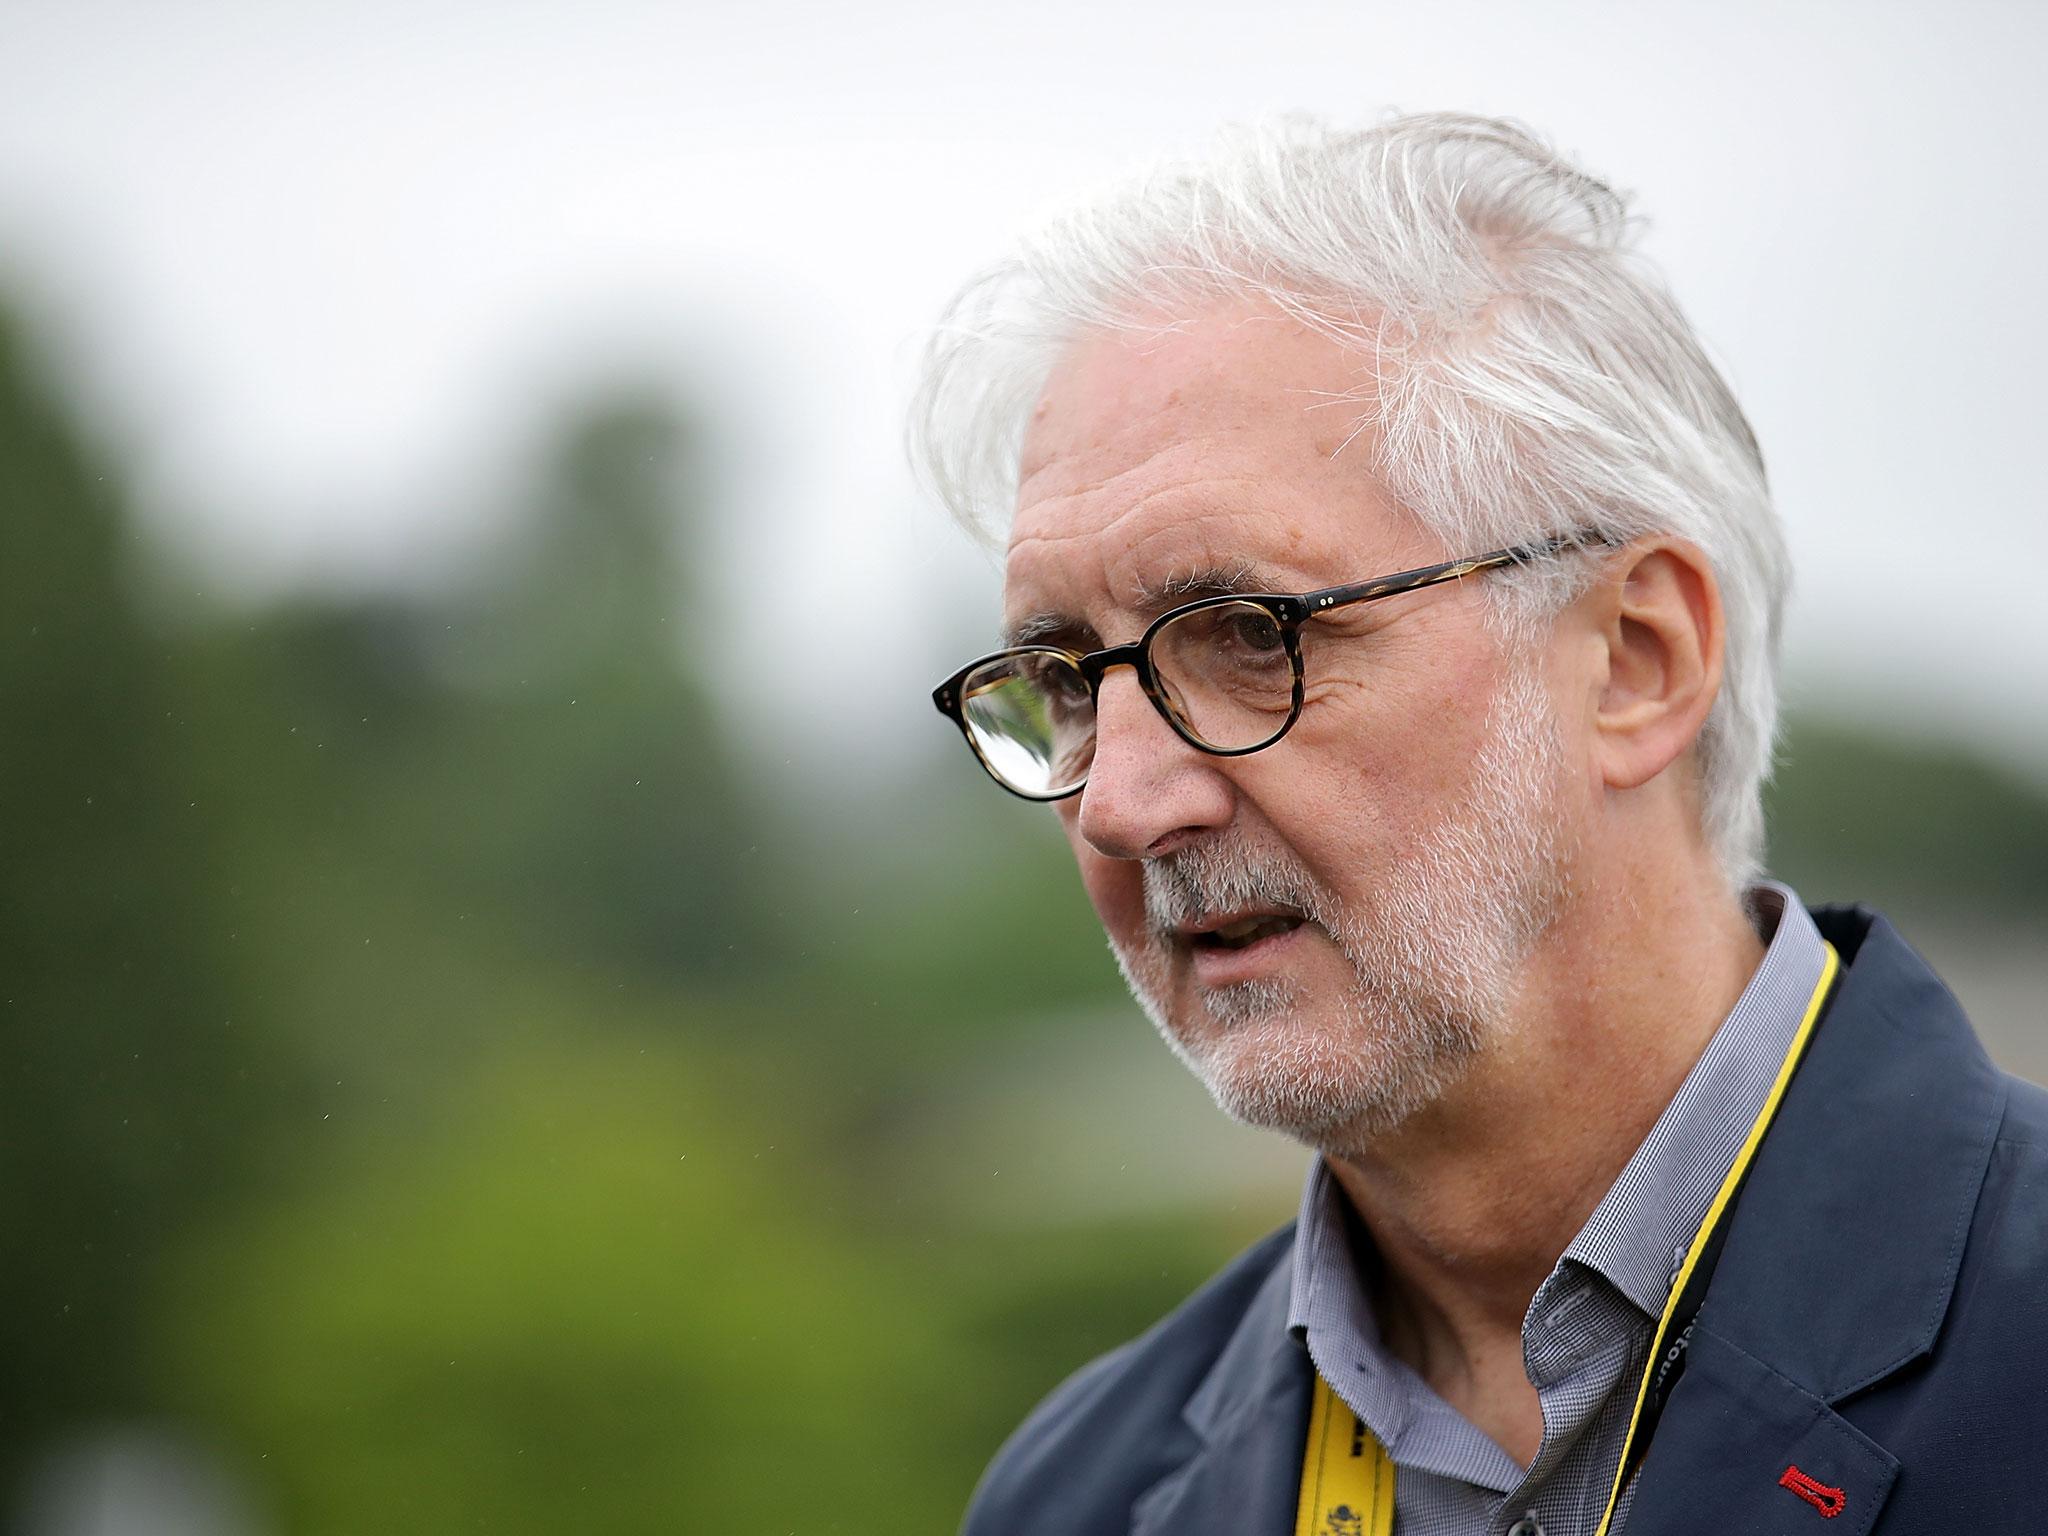 Brian Cookson said he had 'no role or influence' in how Froome's case was handled